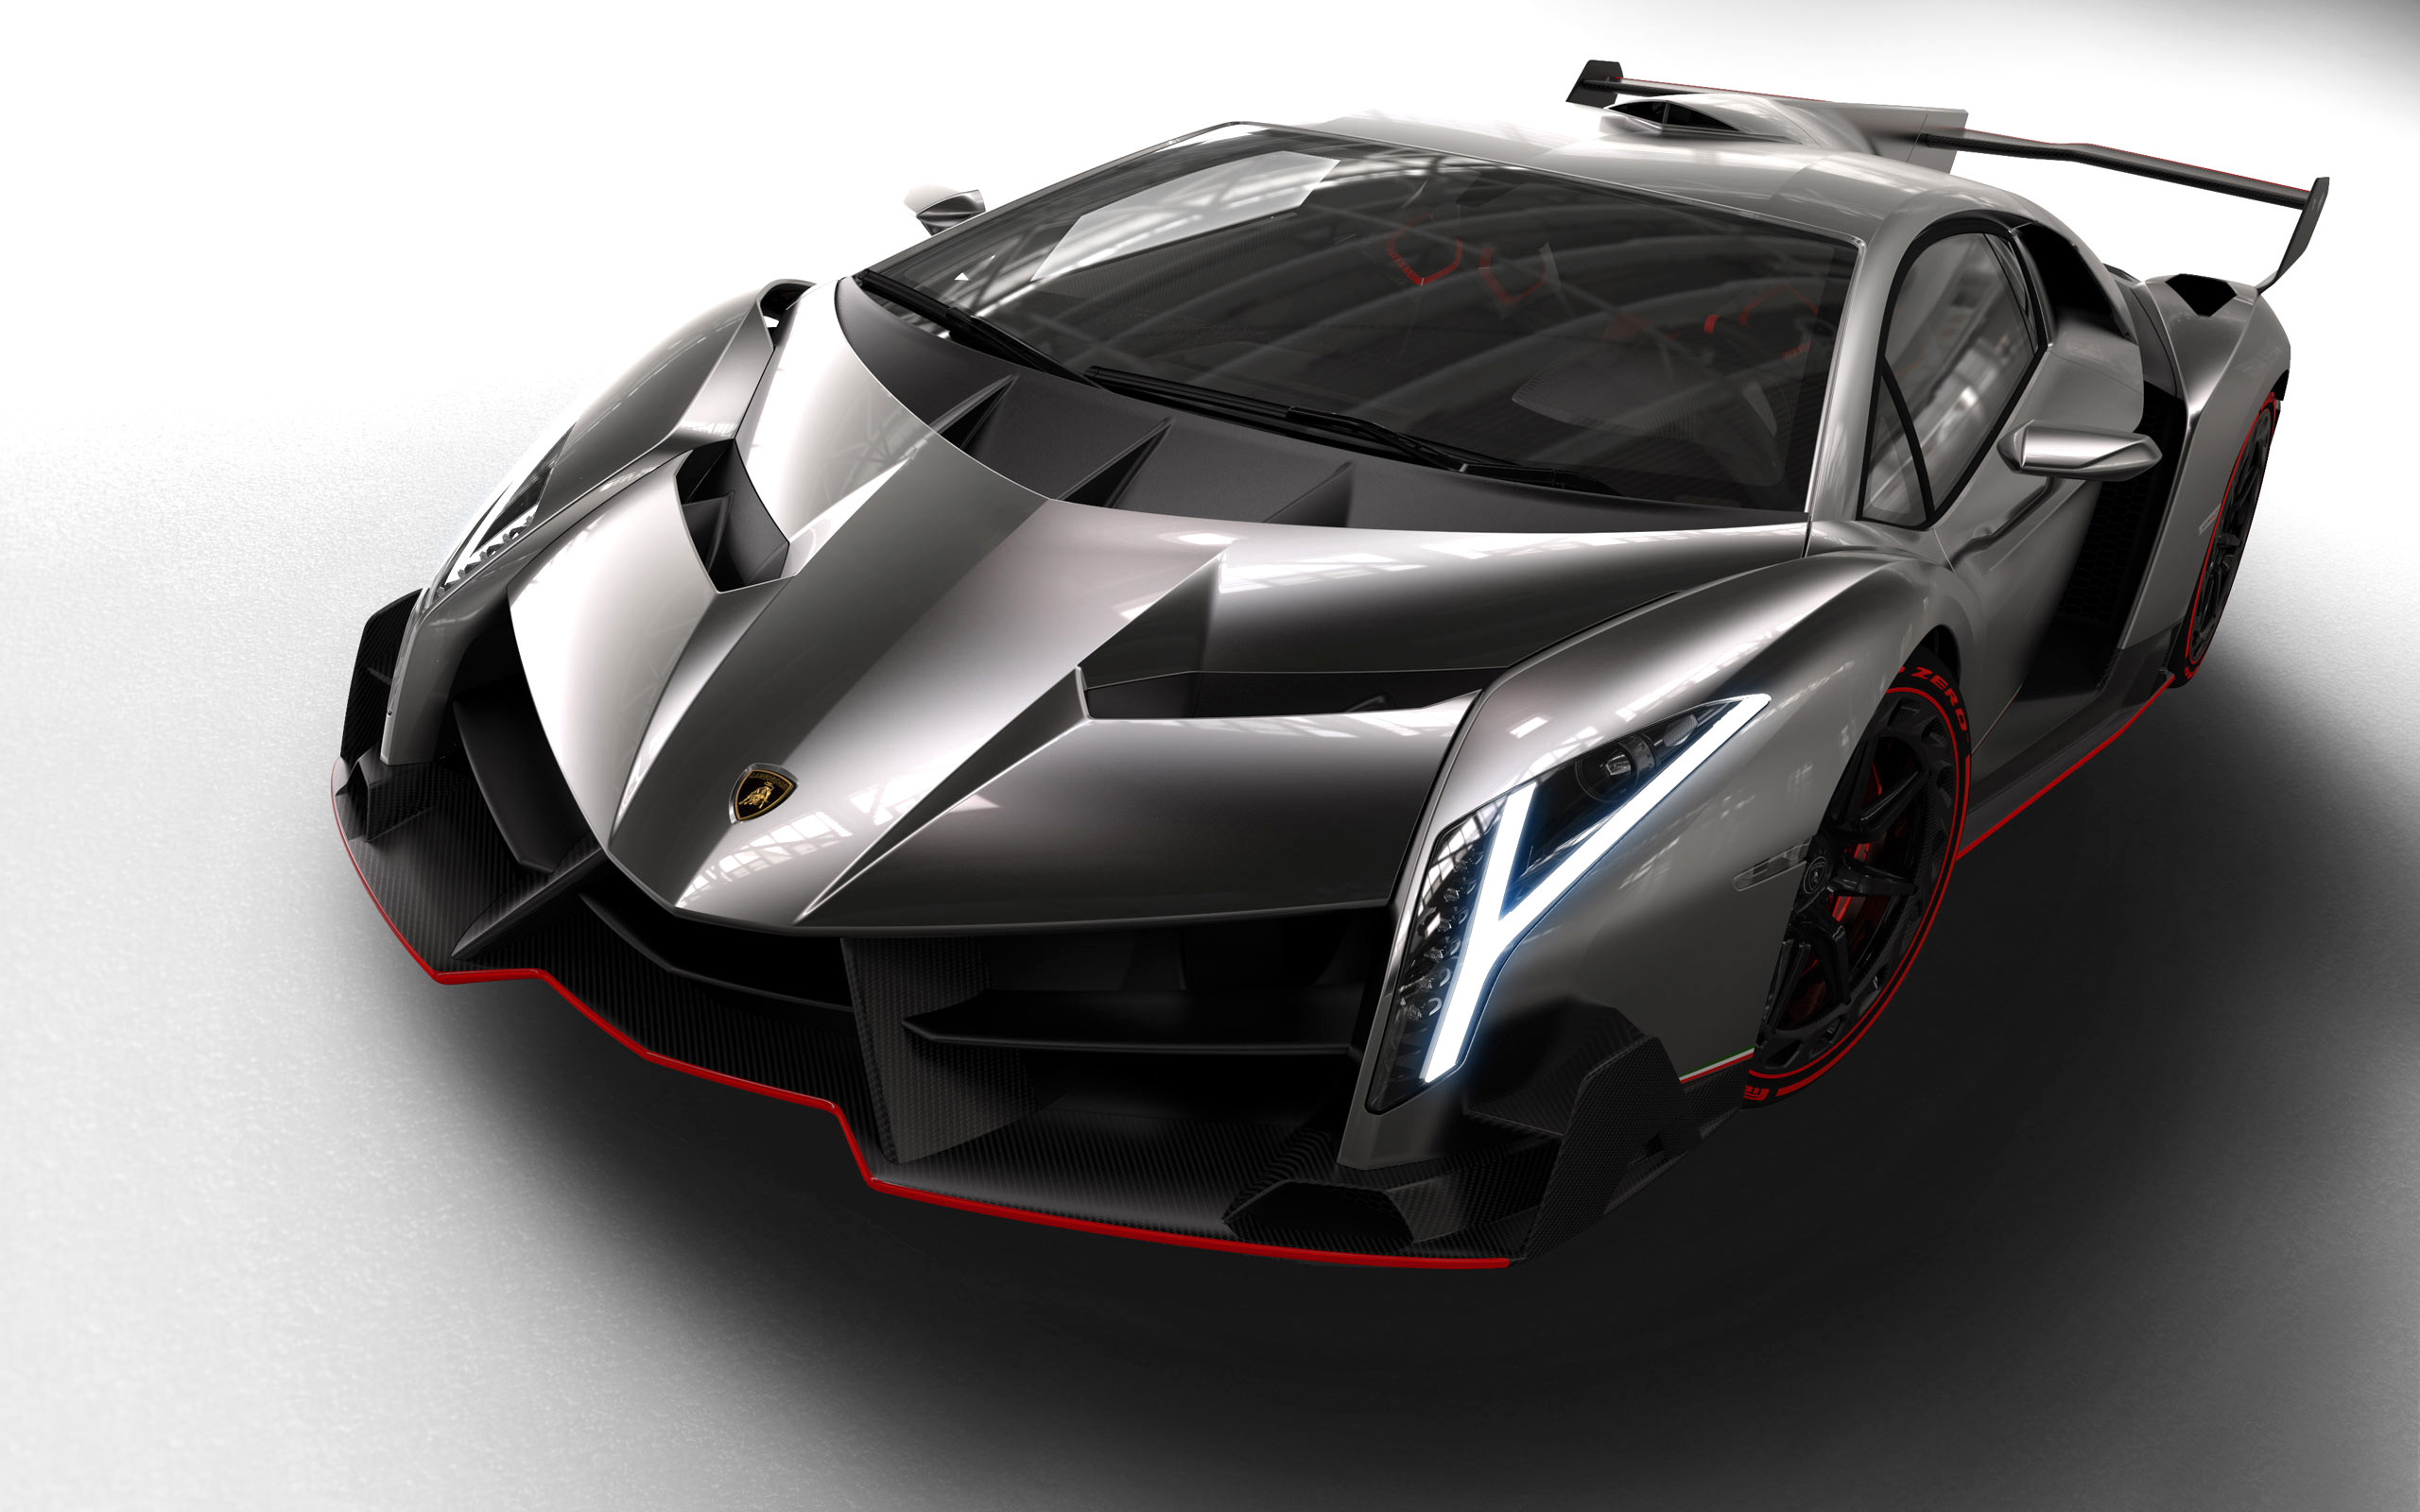 2560x1600 Cool Cars Pictures Hd